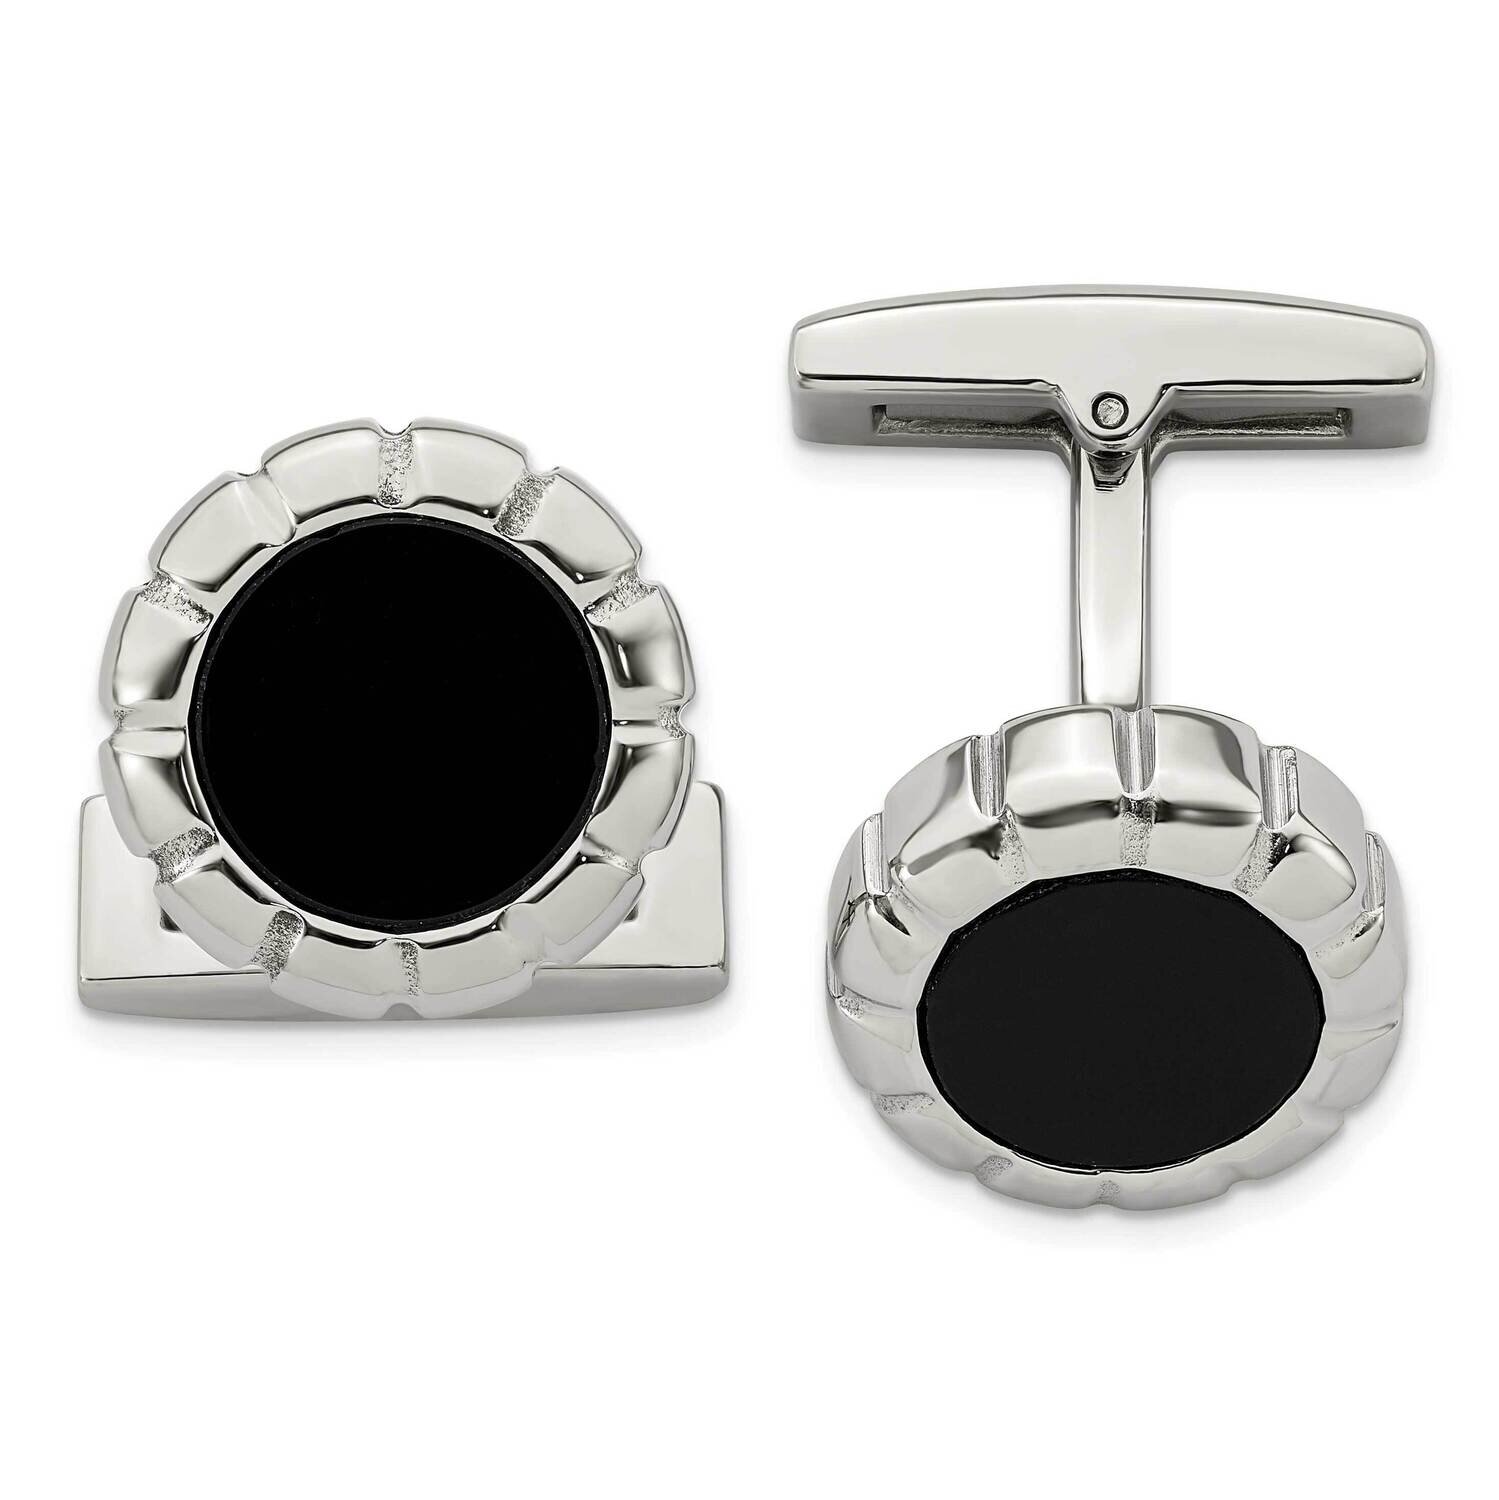 Black Ip Scalloped Round Cufflinks Stainless Steel Polished SRC342